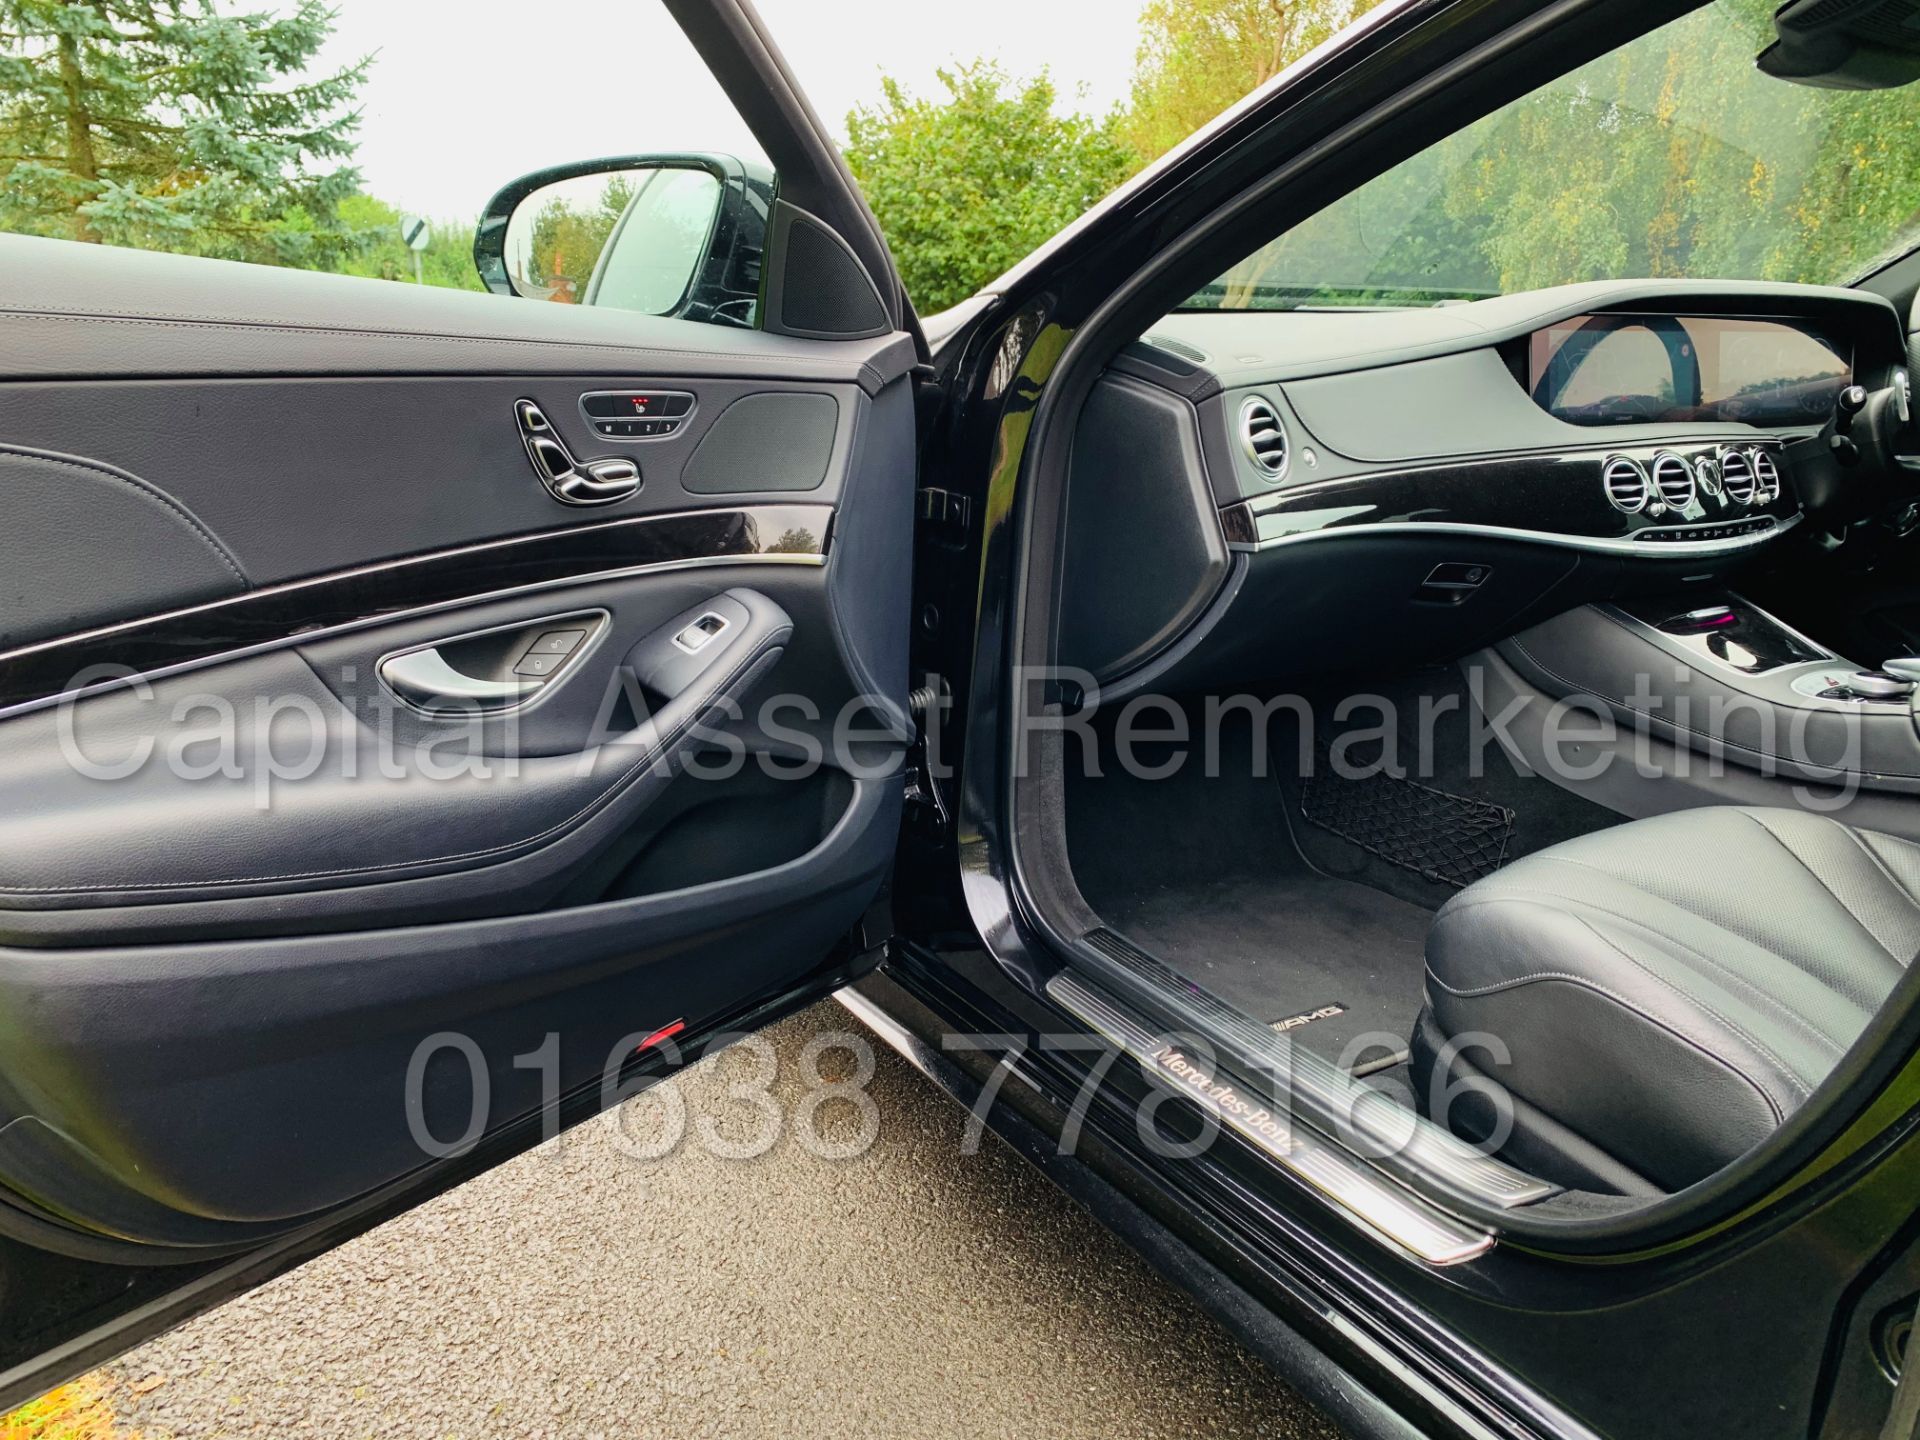 (ON SALE) MERCEDES-BENZ S350D *AMG LINE - SALOON* (2018) 9-G TRONIC - LEATHER - SAT NAV - Image 57 of 172